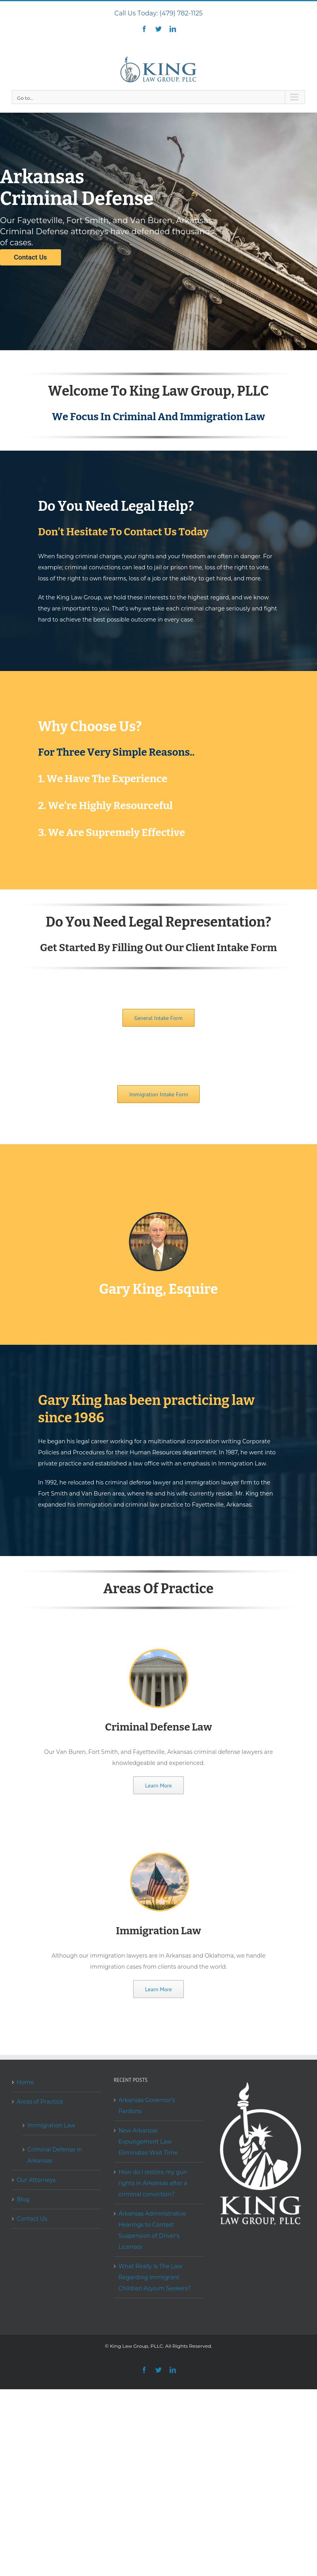 King Law Group, PLLC - Fort Smith AR Lawyers